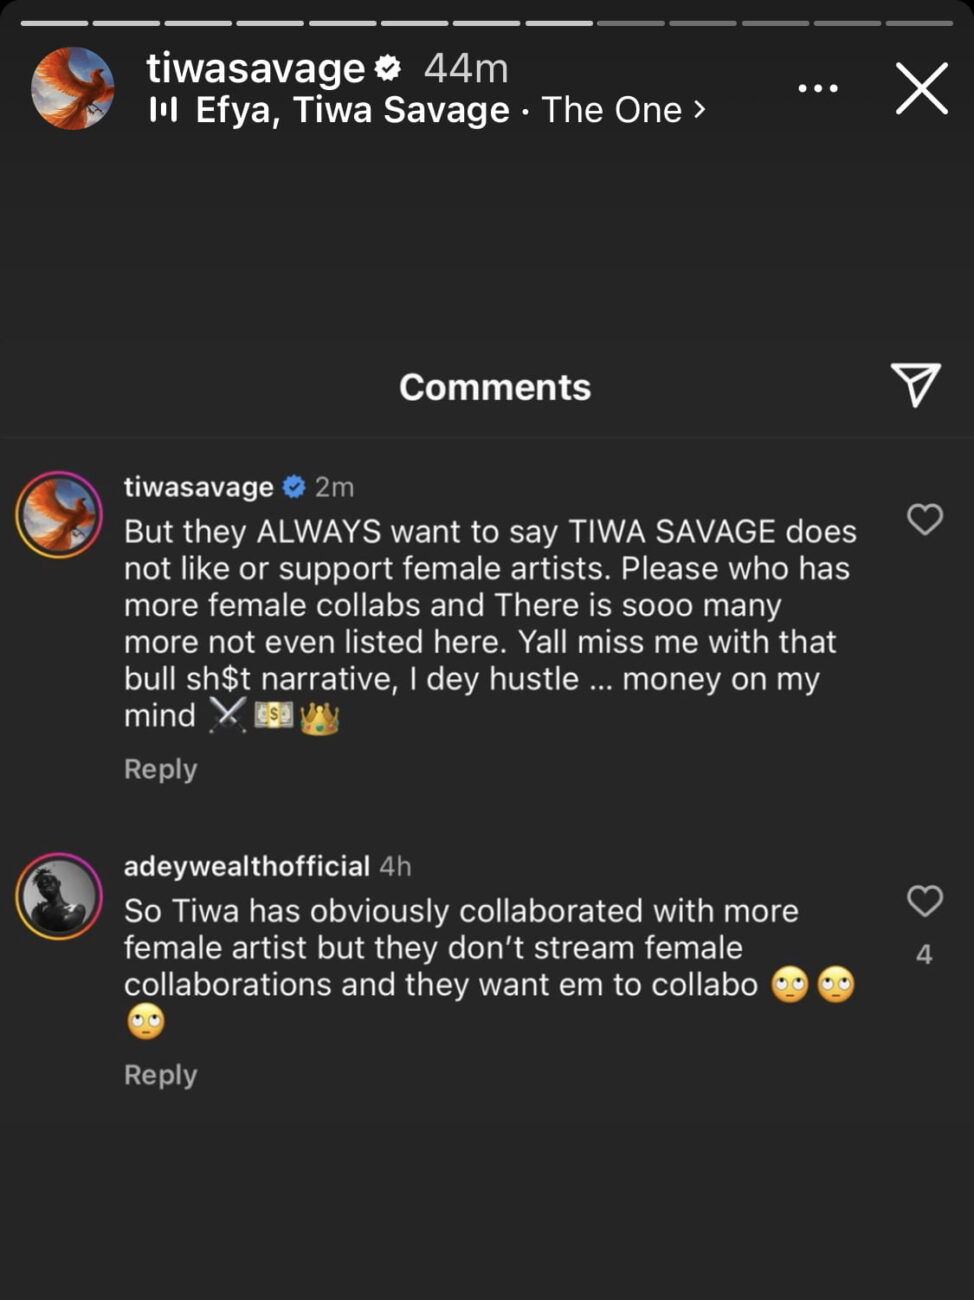 Tiwa Savage addresses rumors that she doesn’t like or support other female artists.